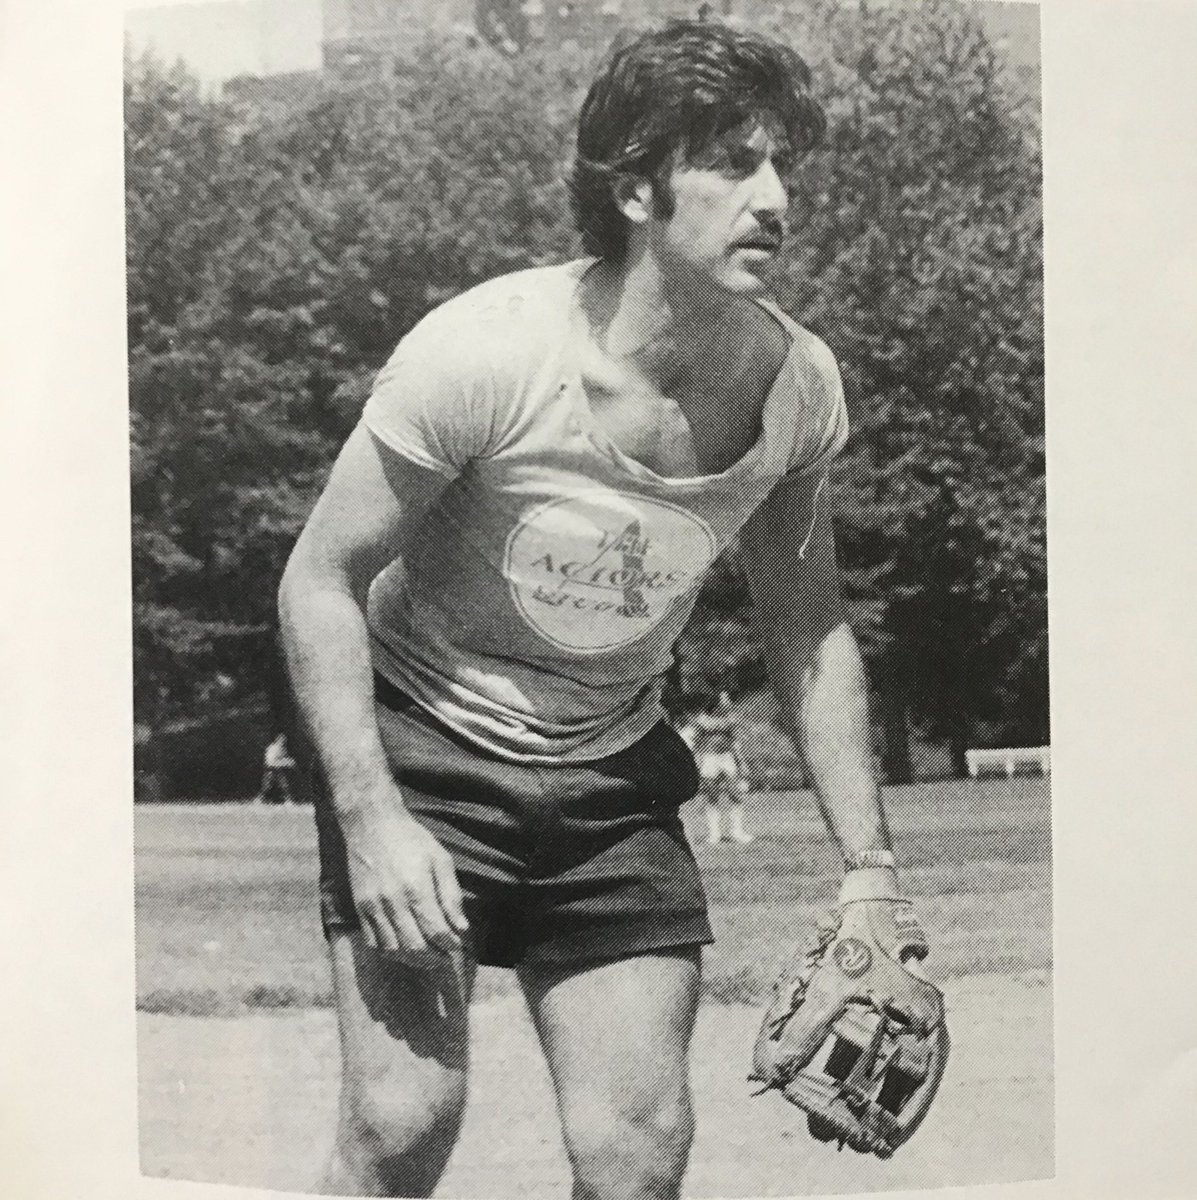 It’s been a long week, so we all deserve this photo of Al Pacino playing 3rd base for The Actors Studio softball team.